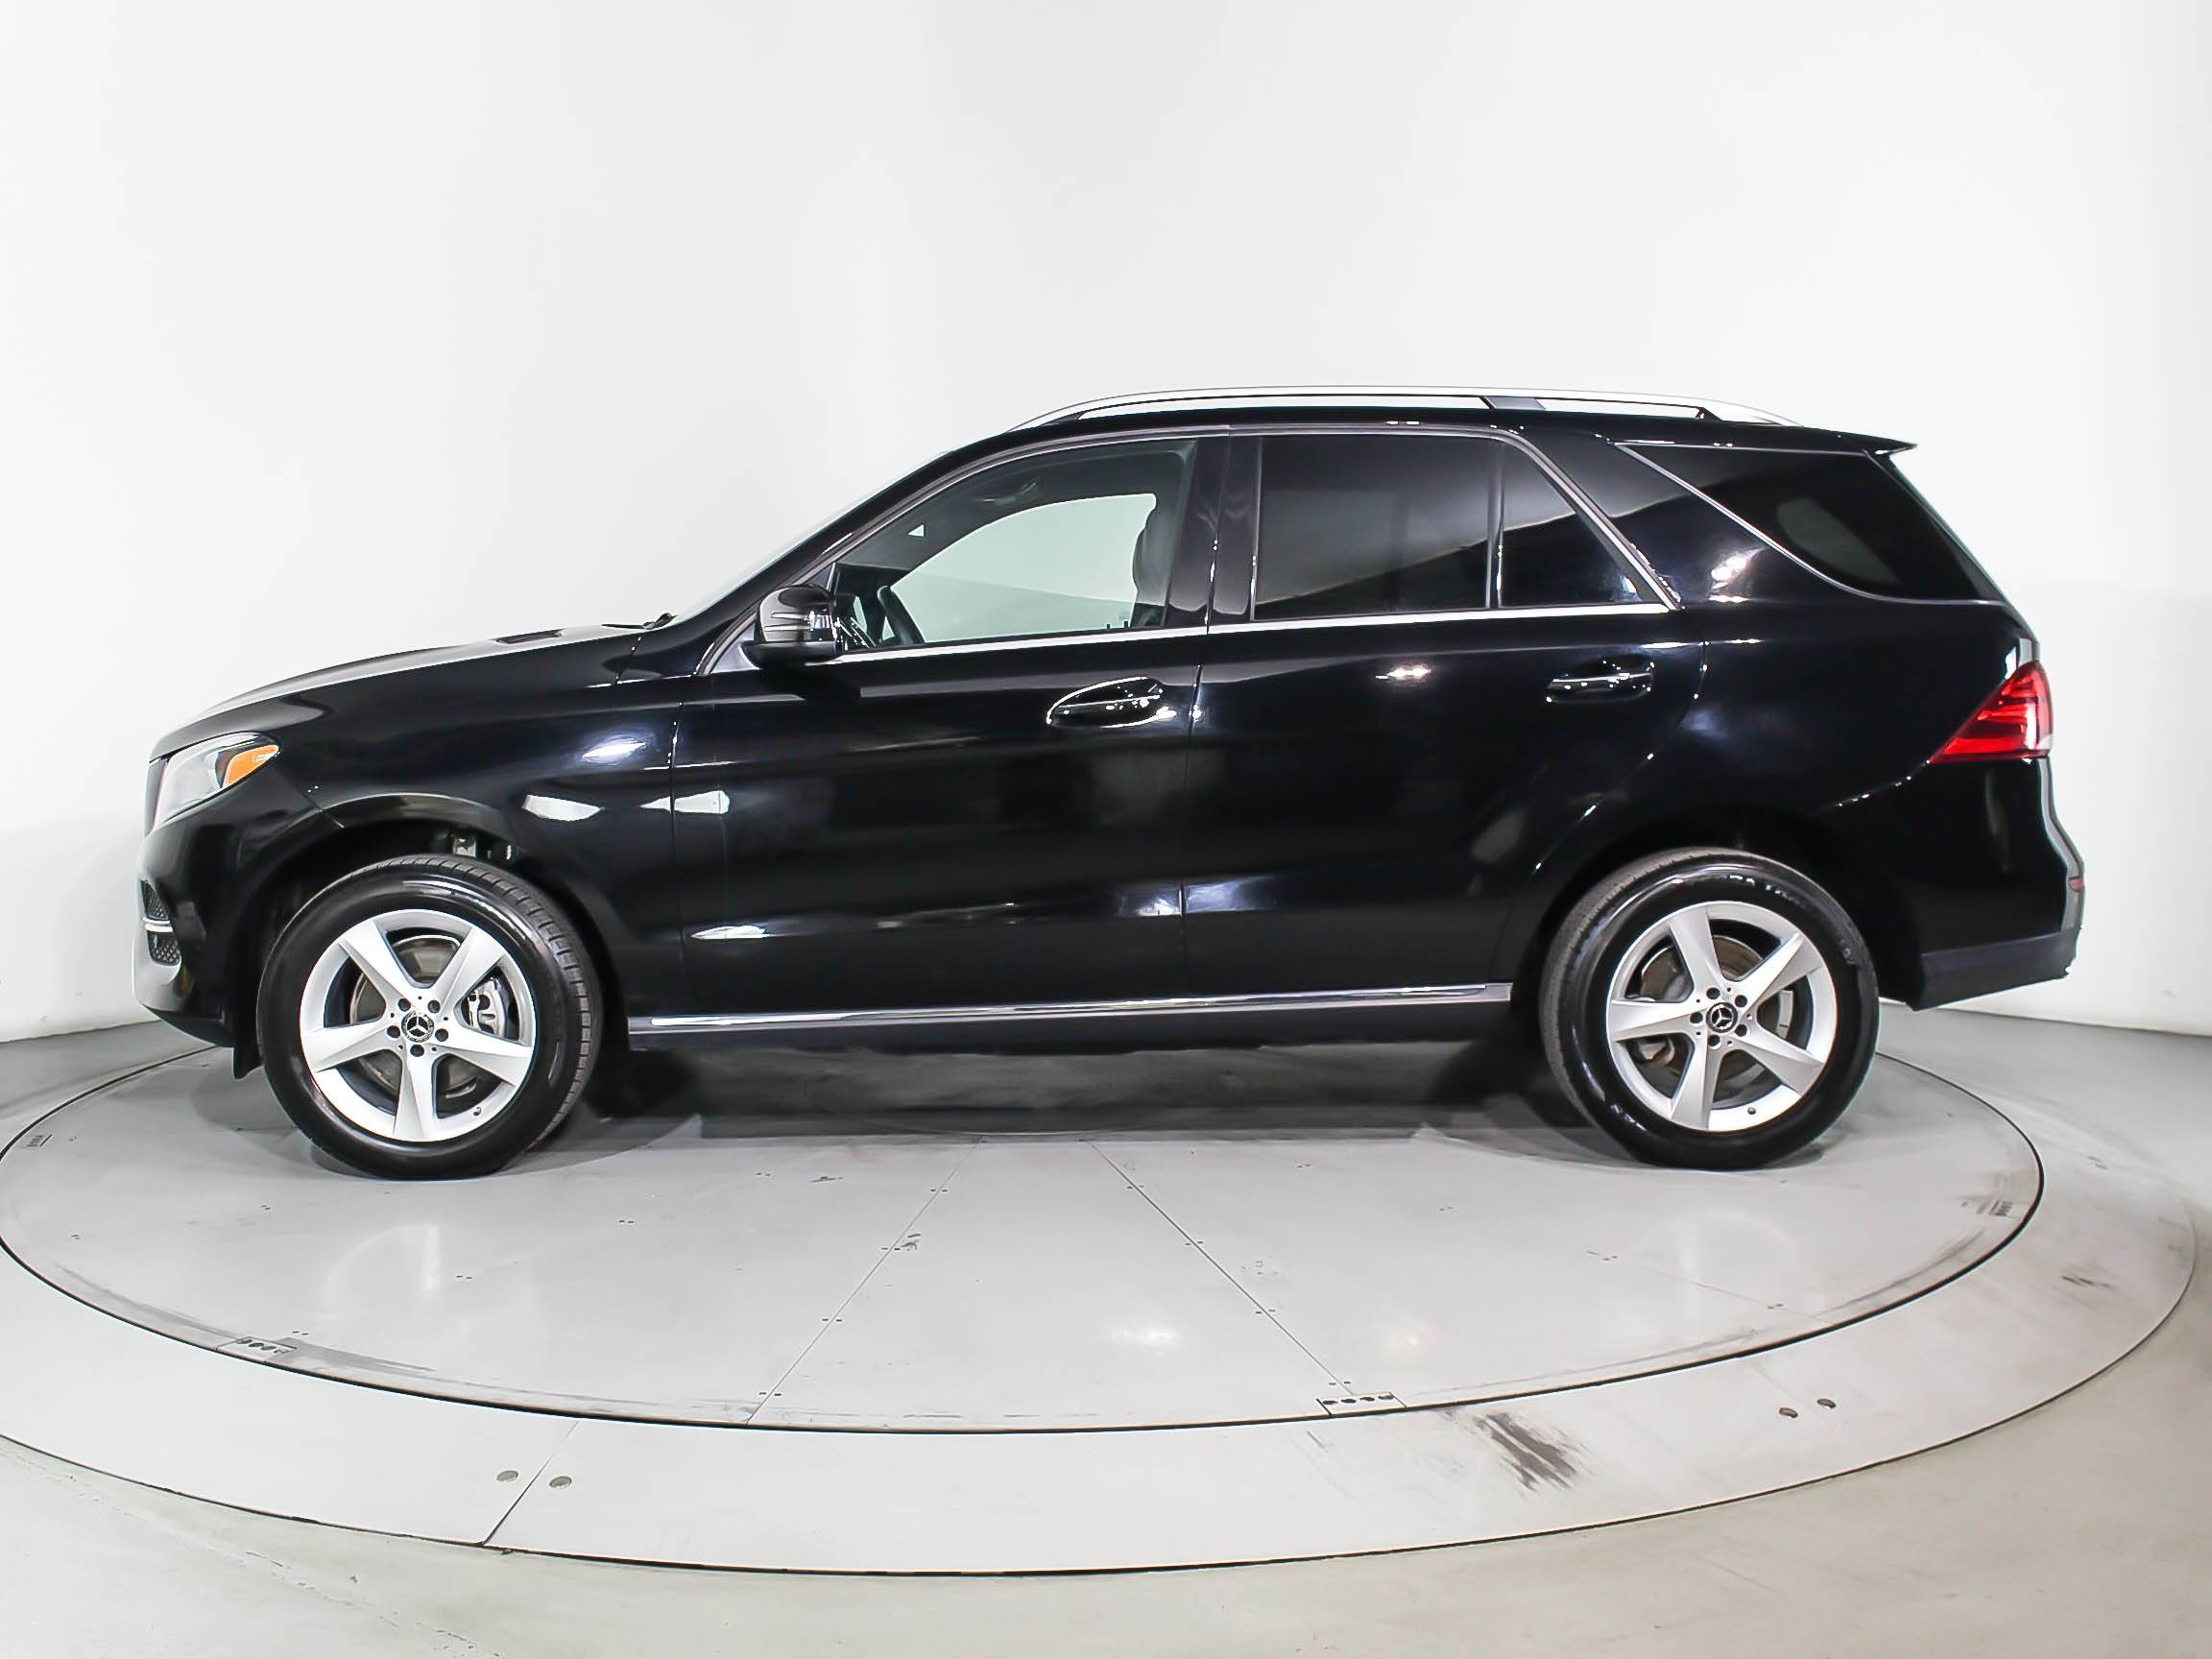 Florida Fine Cars - Used MERCEDES-BENZ GLE CLASS 2017 HOLLYWOOD GLE350